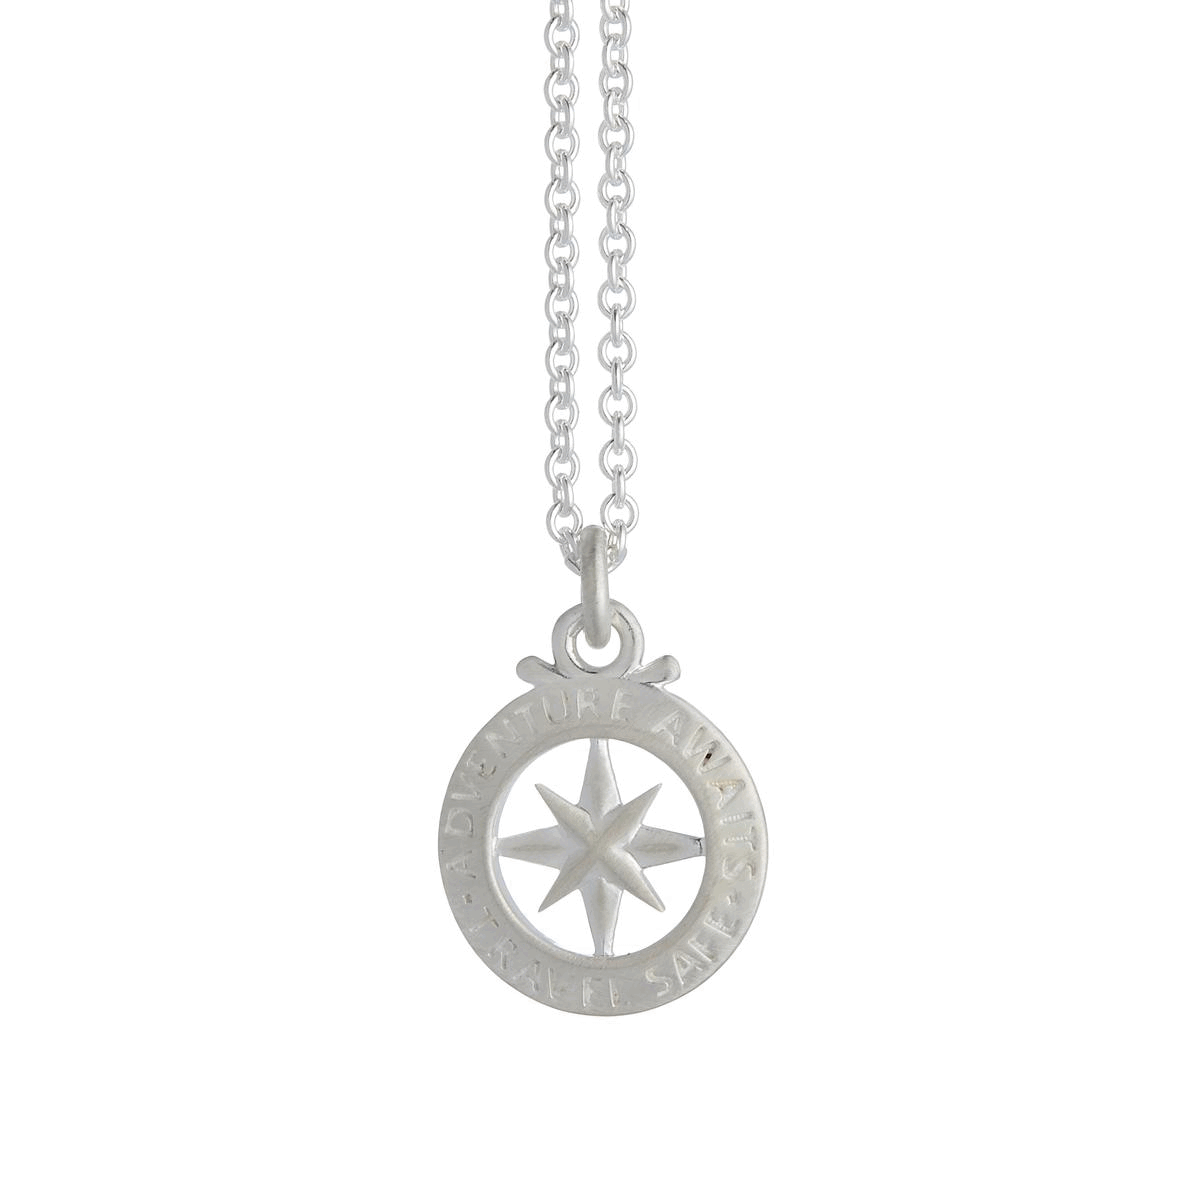 Travel Safe Outline Compass Silver Charm